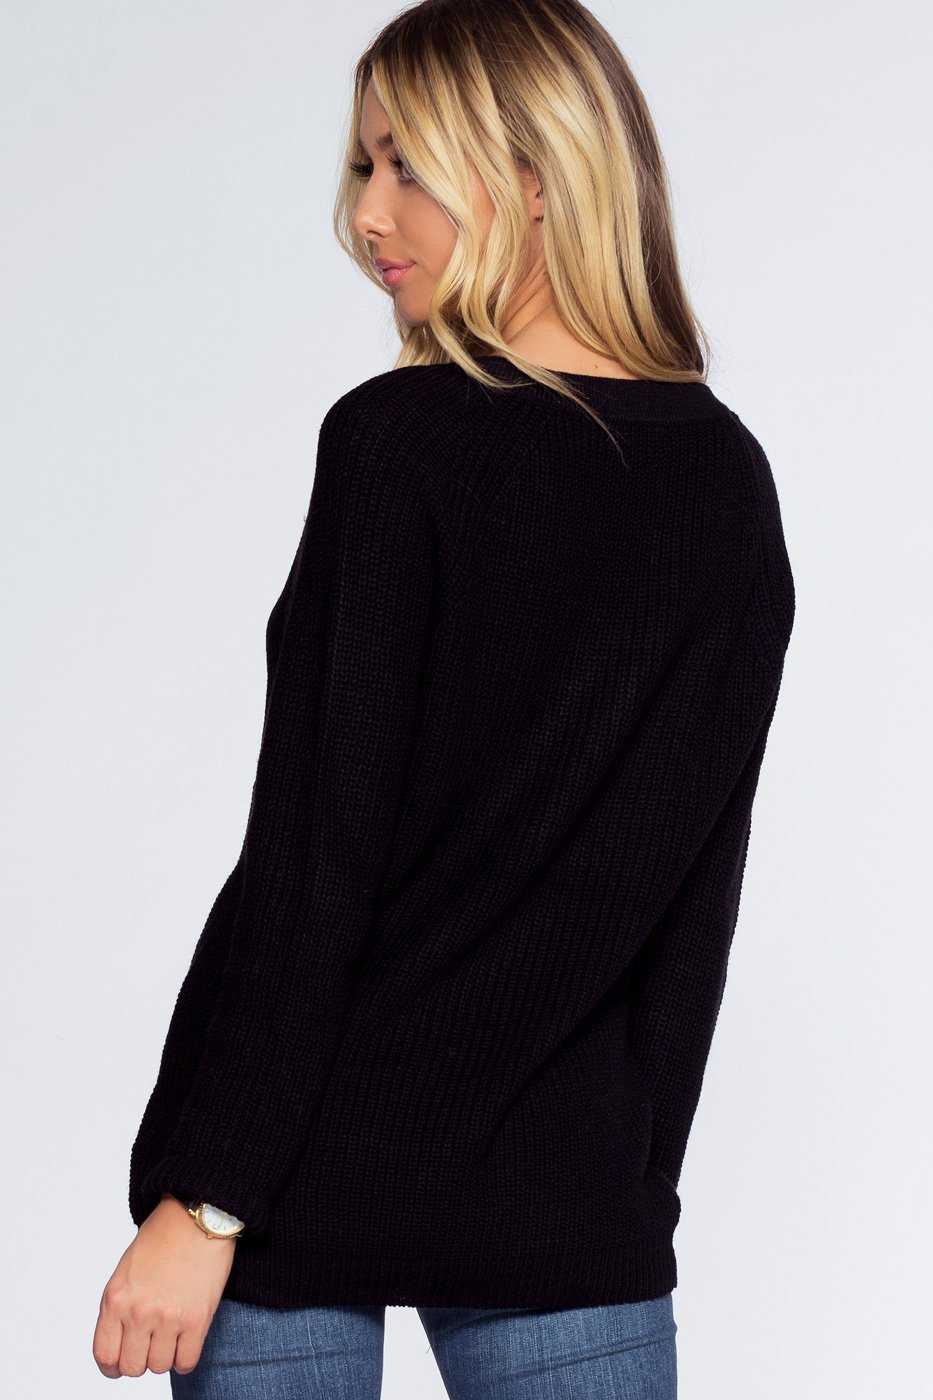 Elsa Lace Up Sweater - Black by Priceless